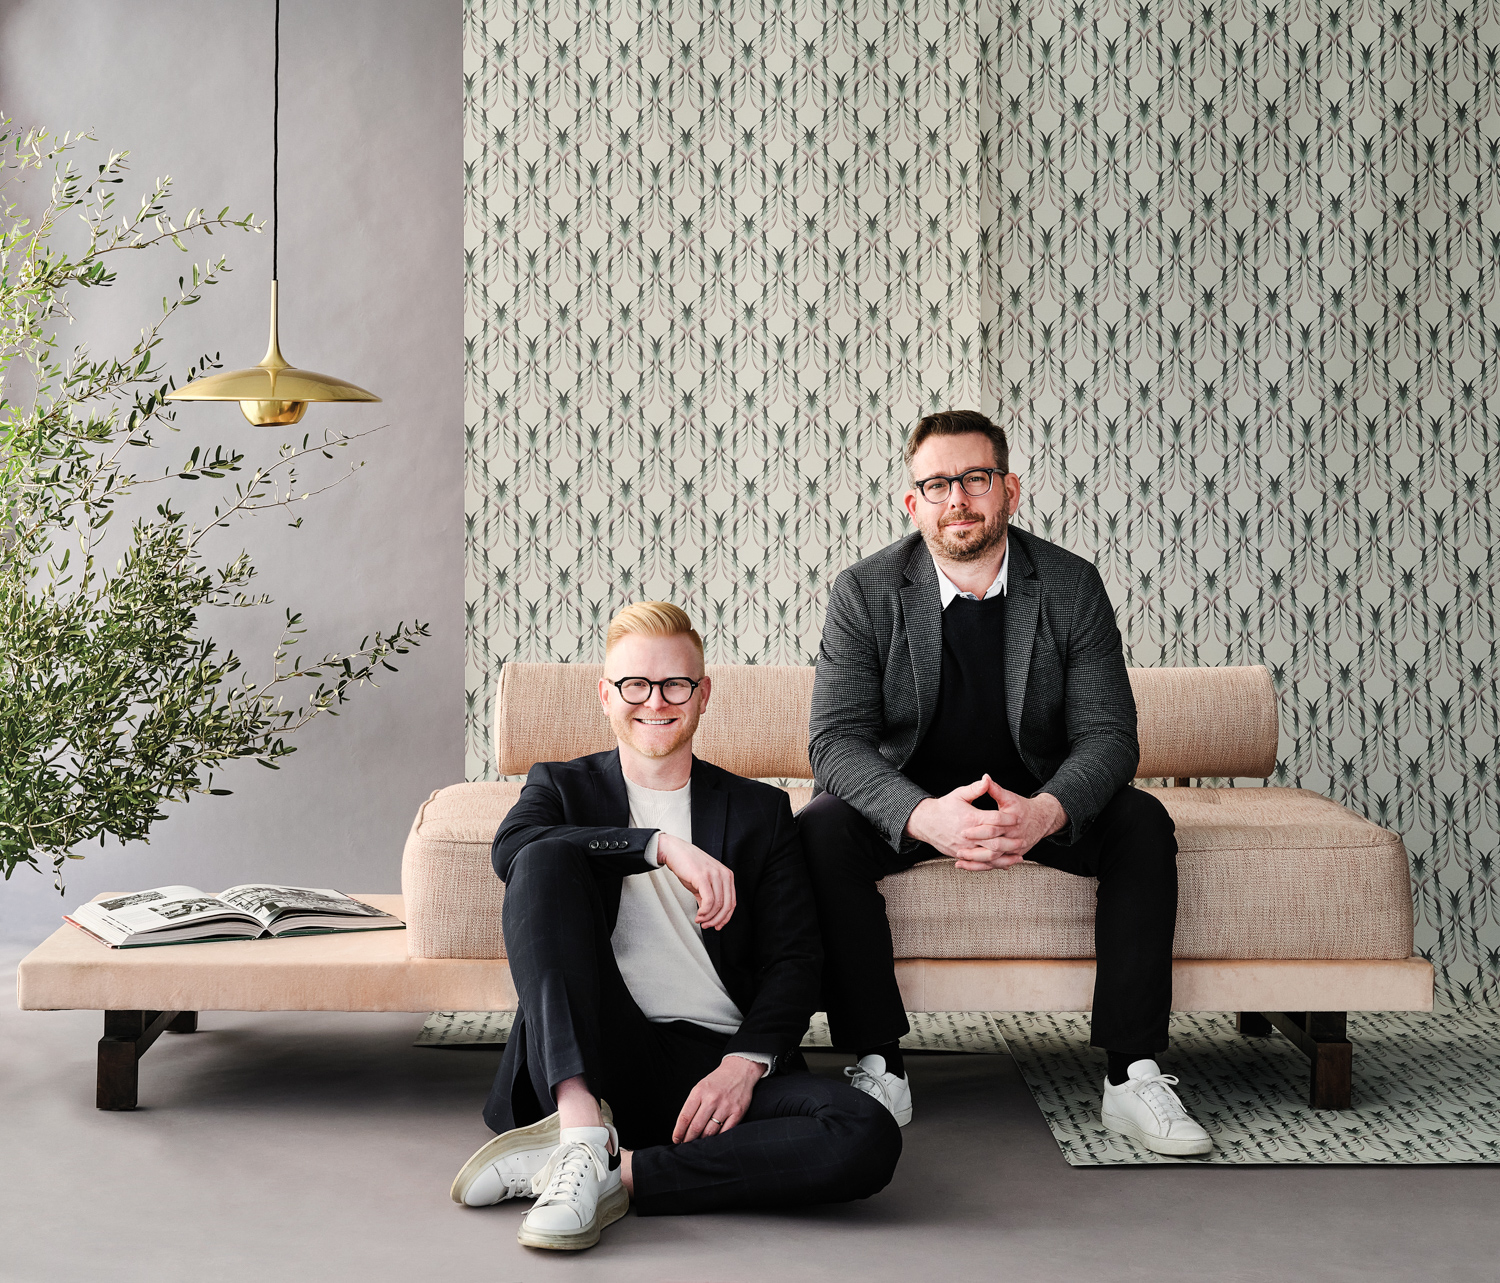 Bryan Yates and Mike Yates of Yates Desygn sit in front of a patterned wallpaper backdrop